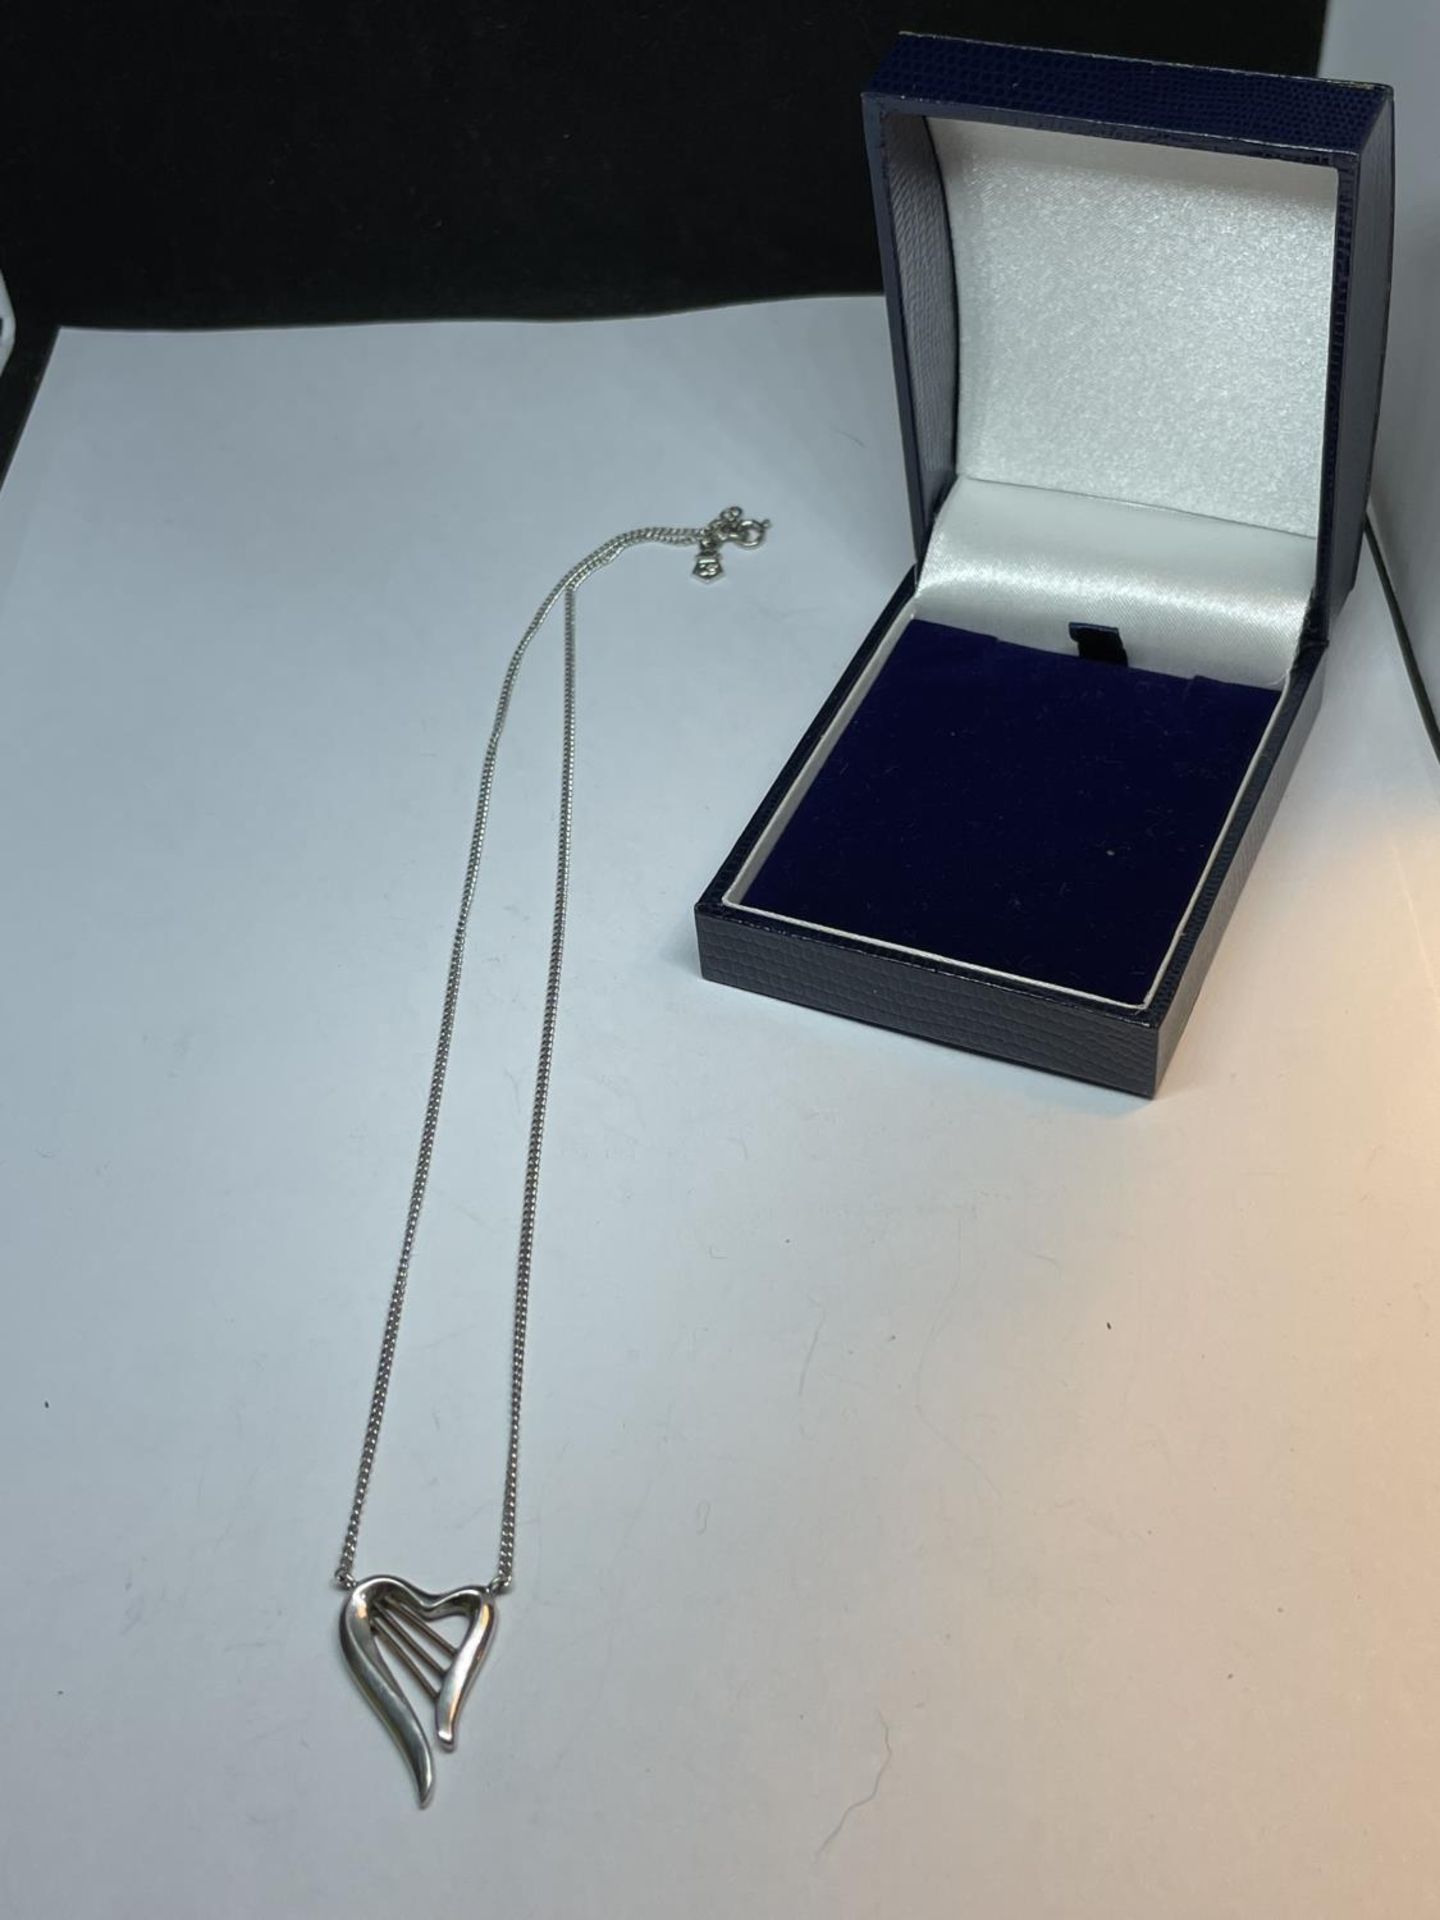 A SILVER WELSH CLOGAU NECKLACE WITH A HARP AND 9CT GOLD STRINGS IN A PRESENTATION BOX